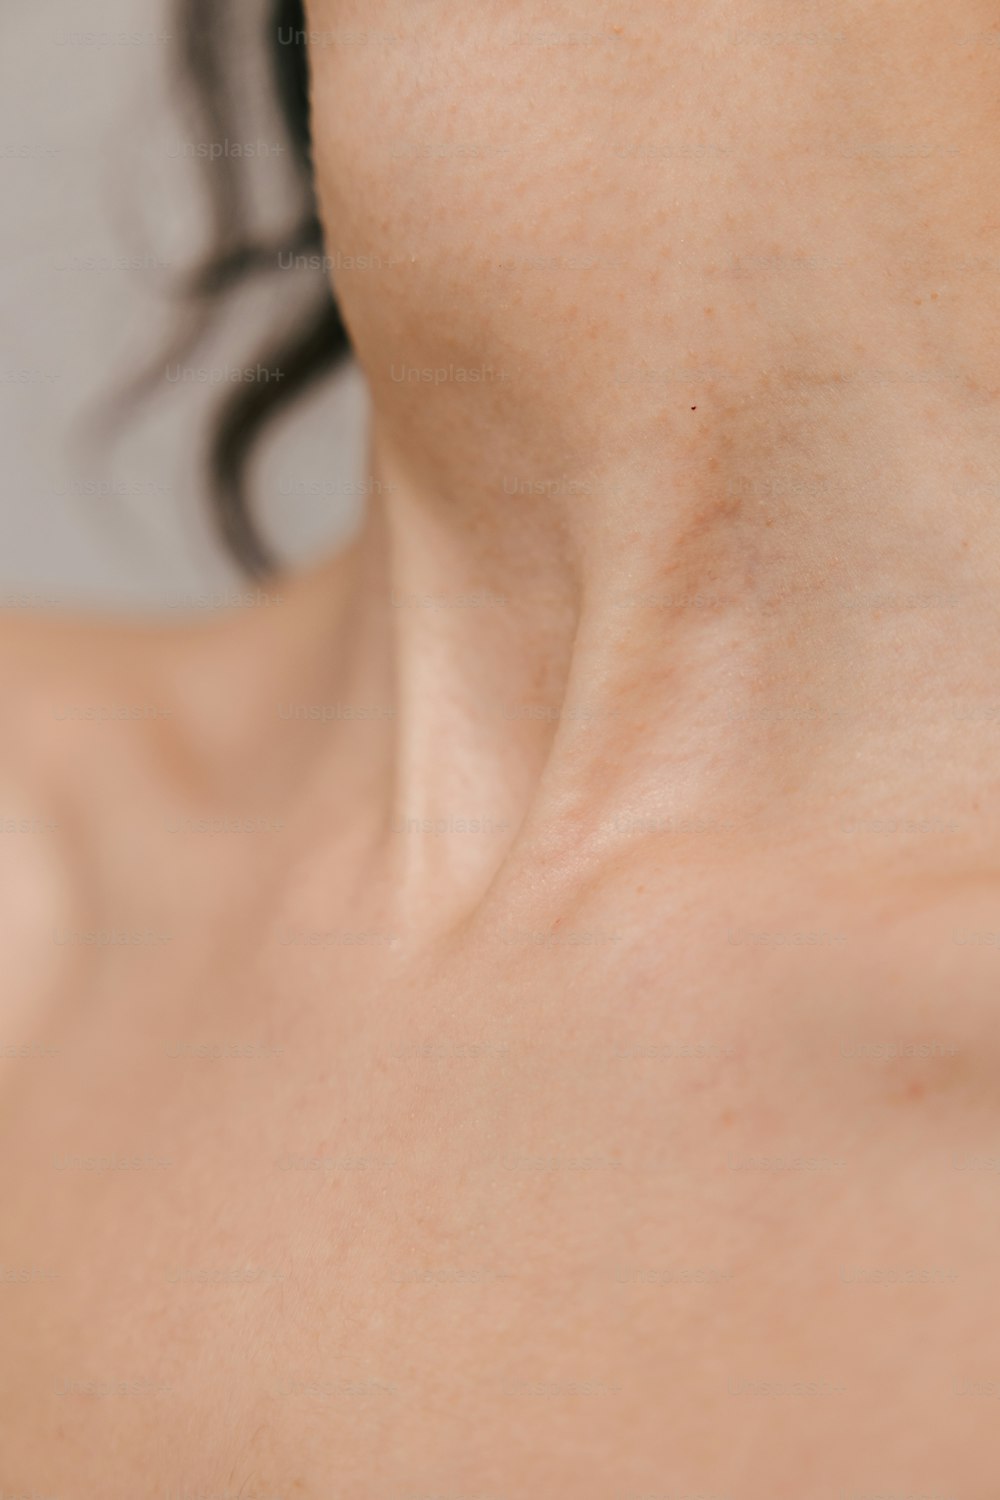 a close up of a woman's neck and neck area